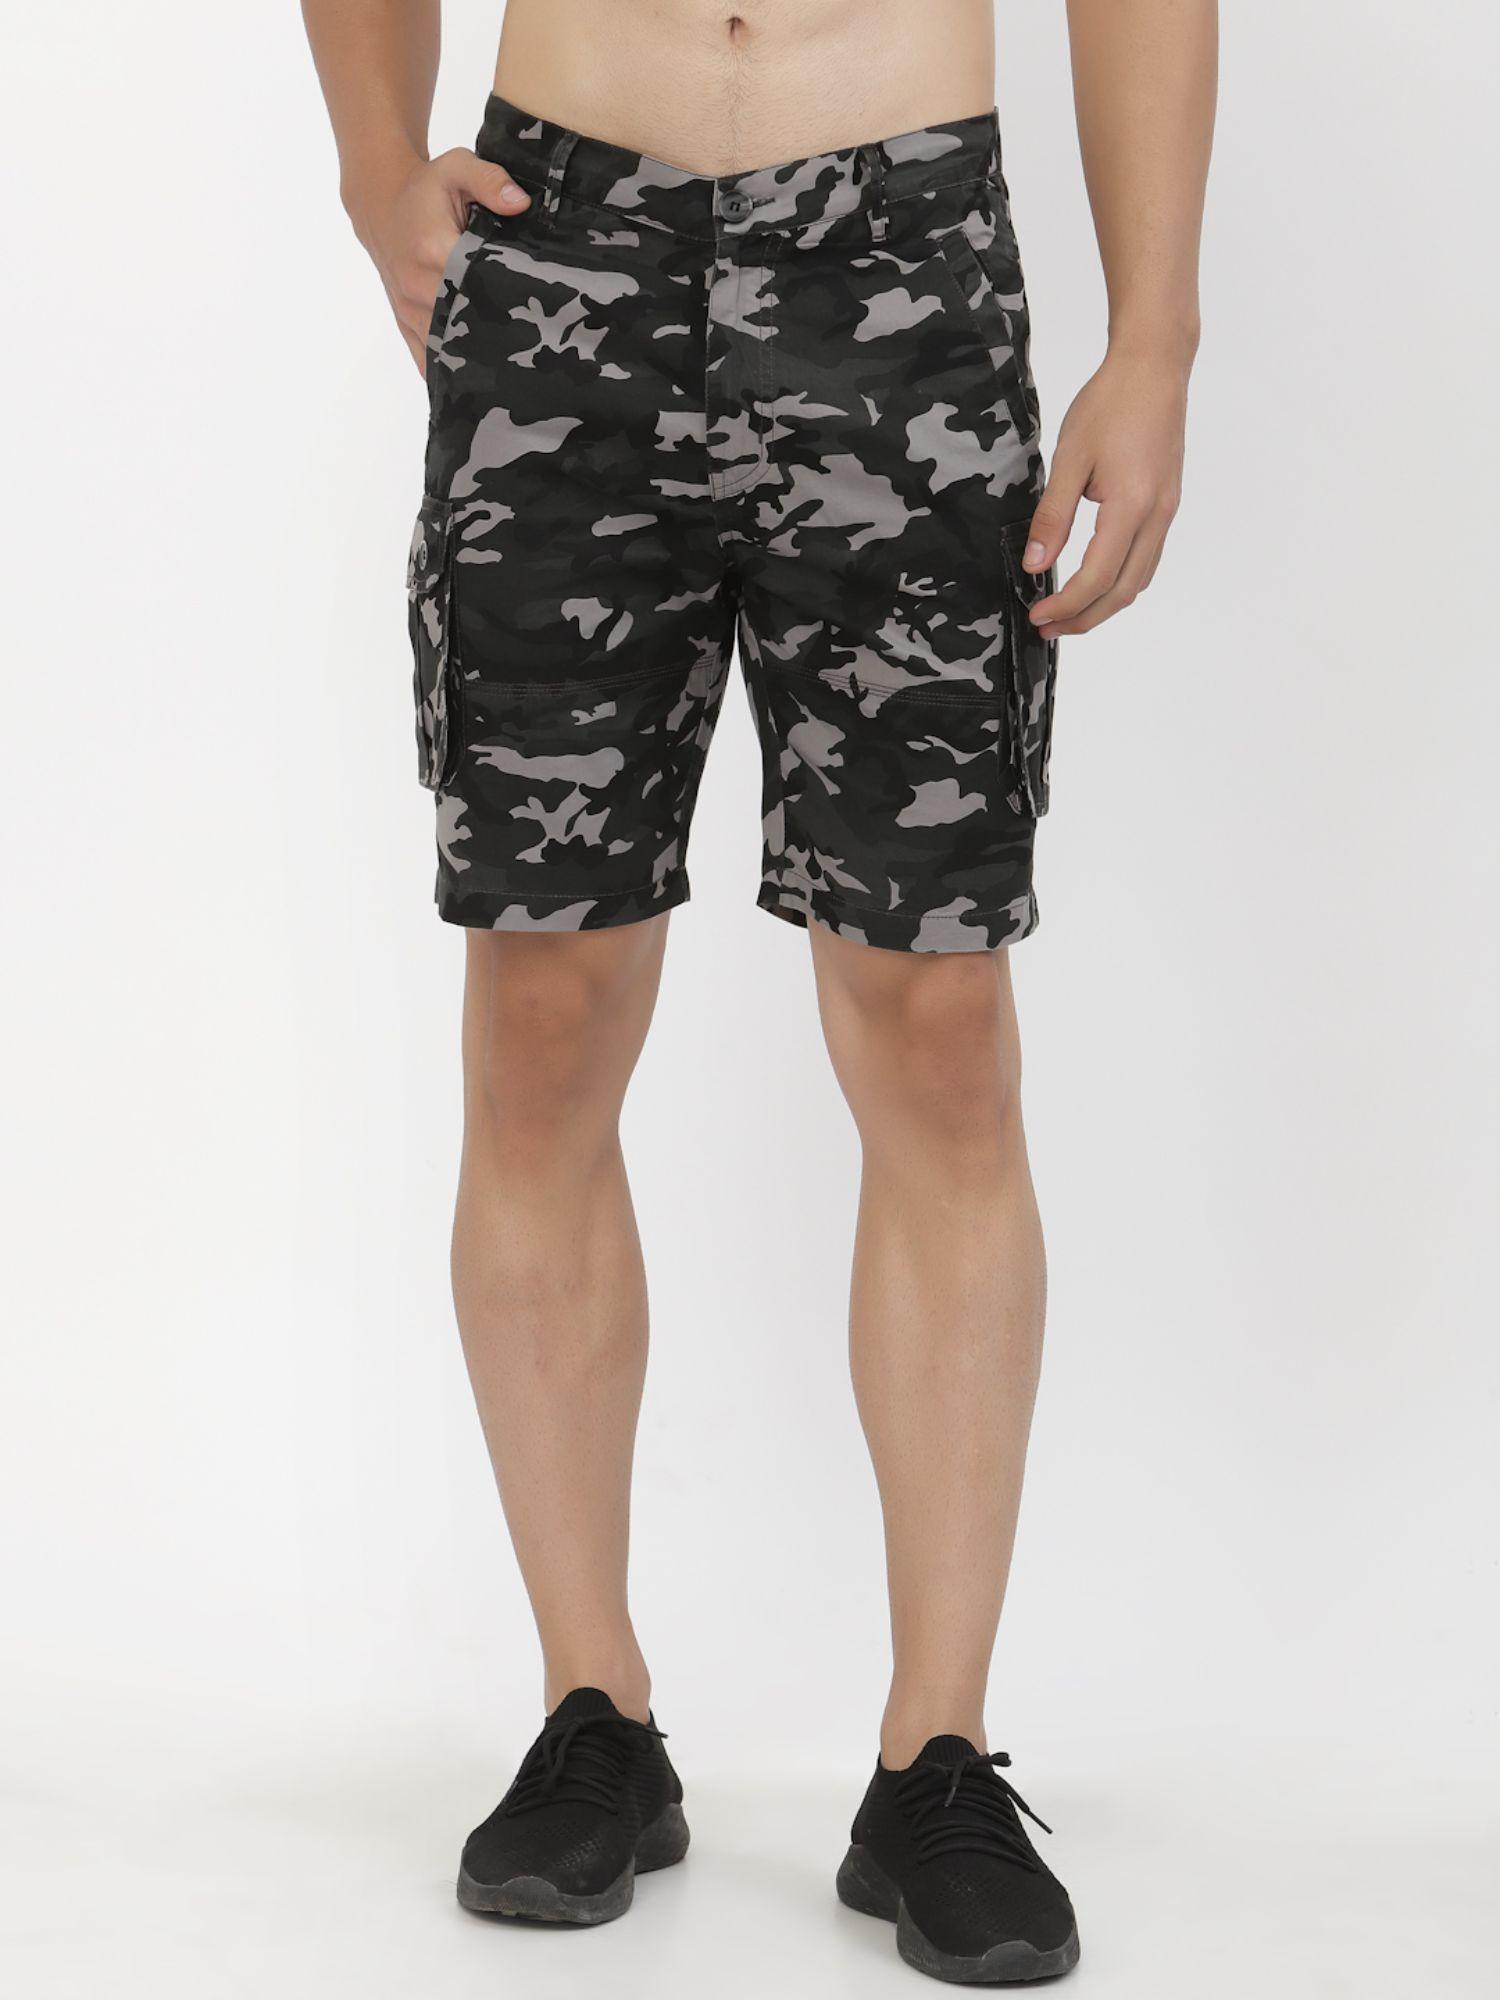 military cargo shorts for men - multi-color